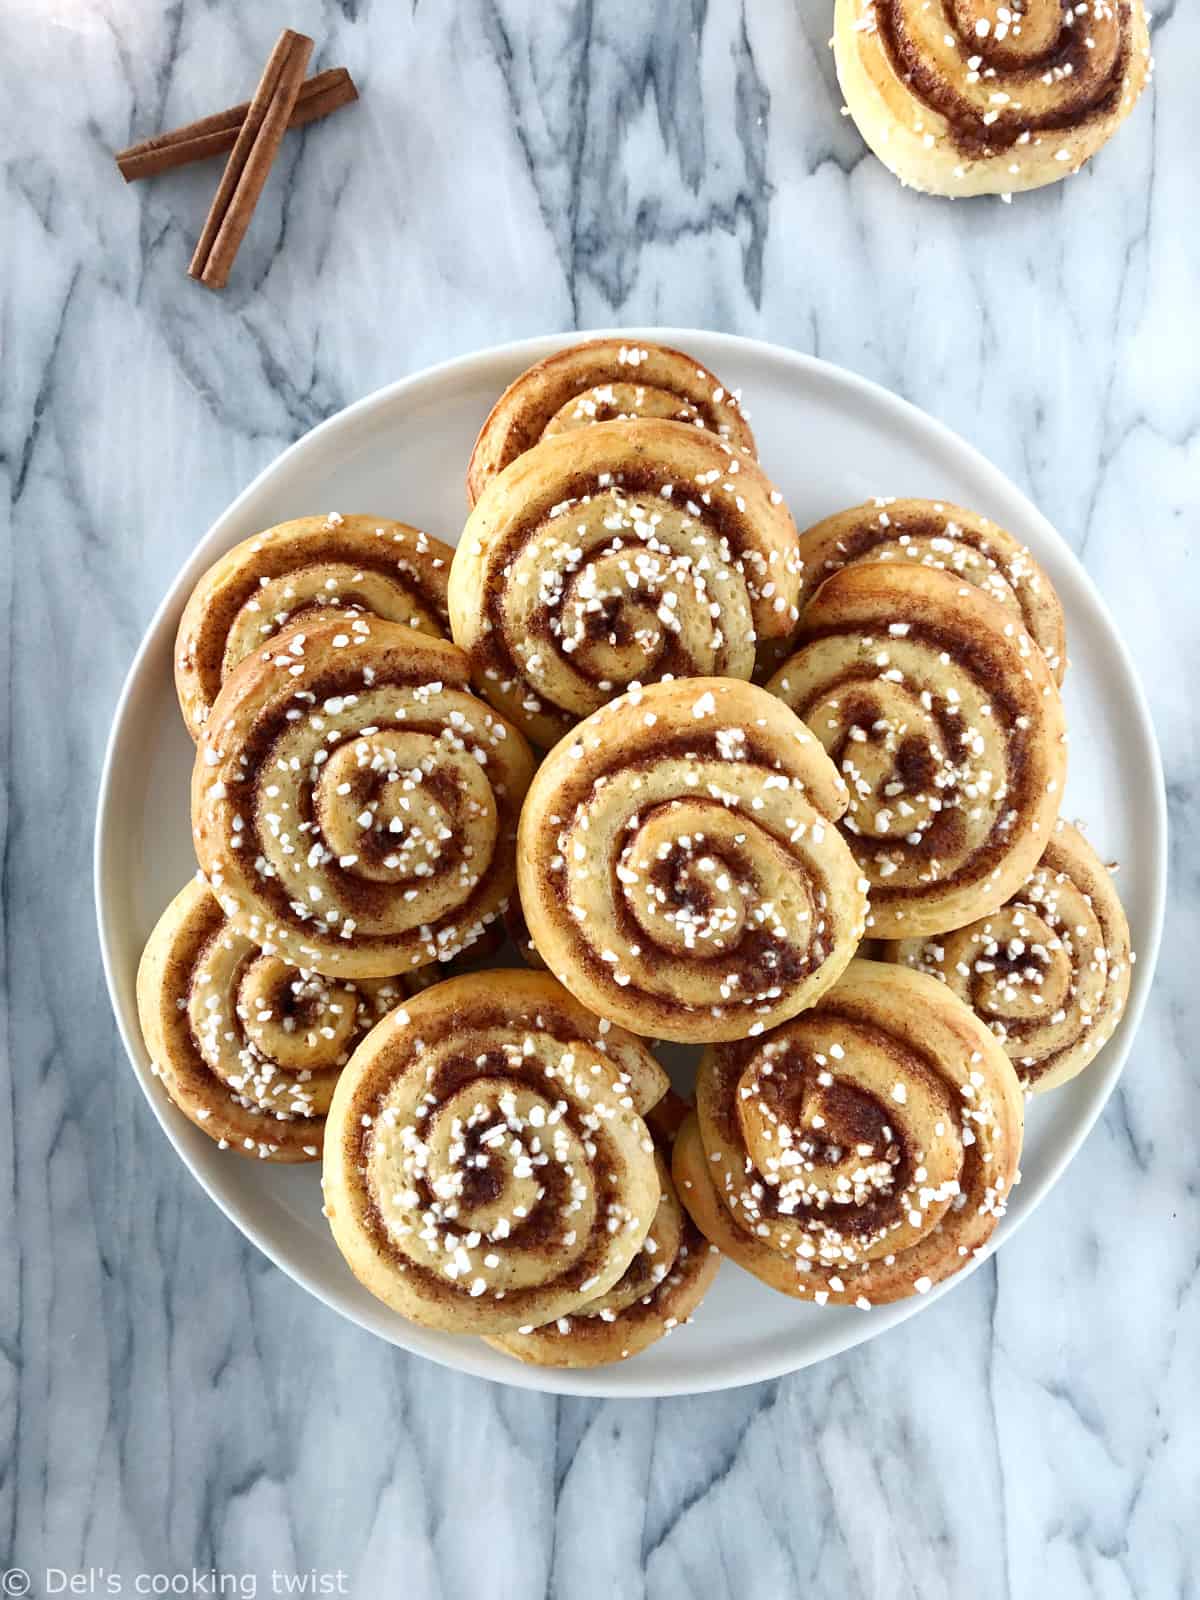 The authentic Swedish cinnamon rolls "kanelbullar". The recipe is extremely easy and comes with a step-by-step tutorial to guide you.